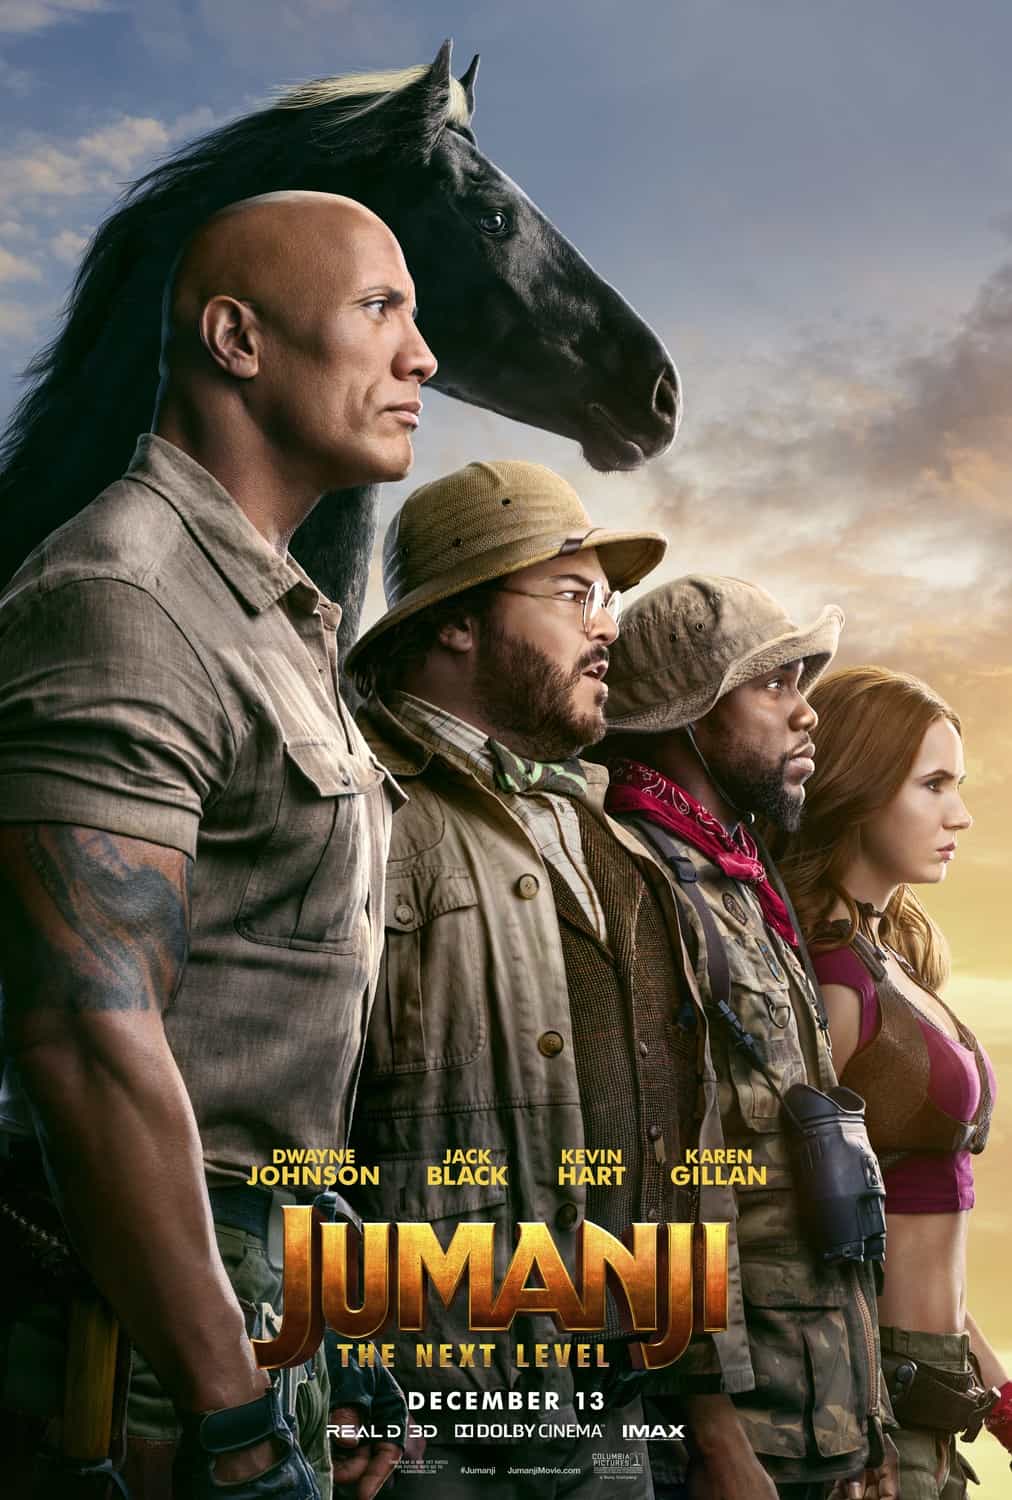 Jumanji: The Next Level is given a 12A age rating for moderate violence